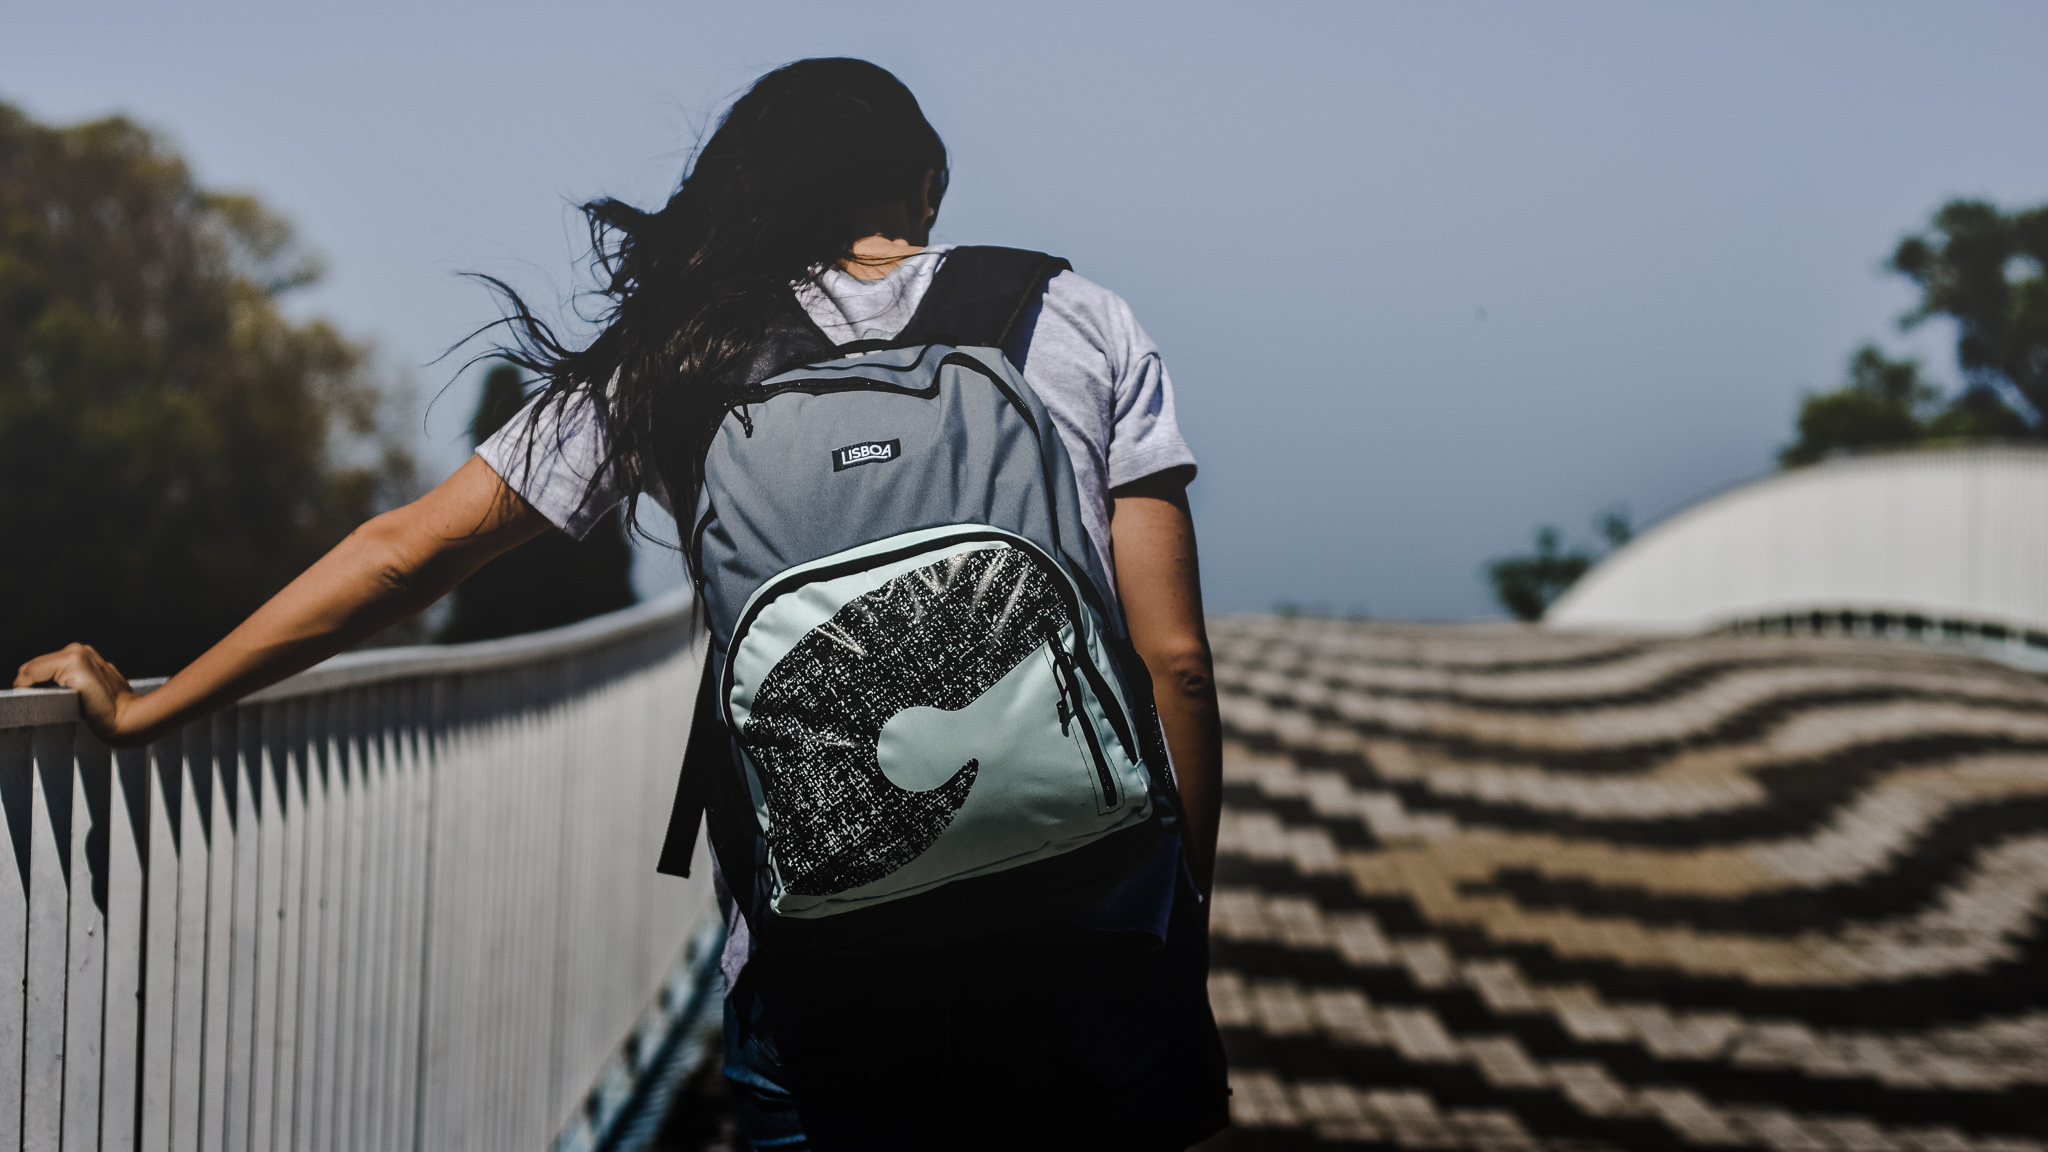 A woman with a backpack strolling on a bridge, enjoying the scenic view.